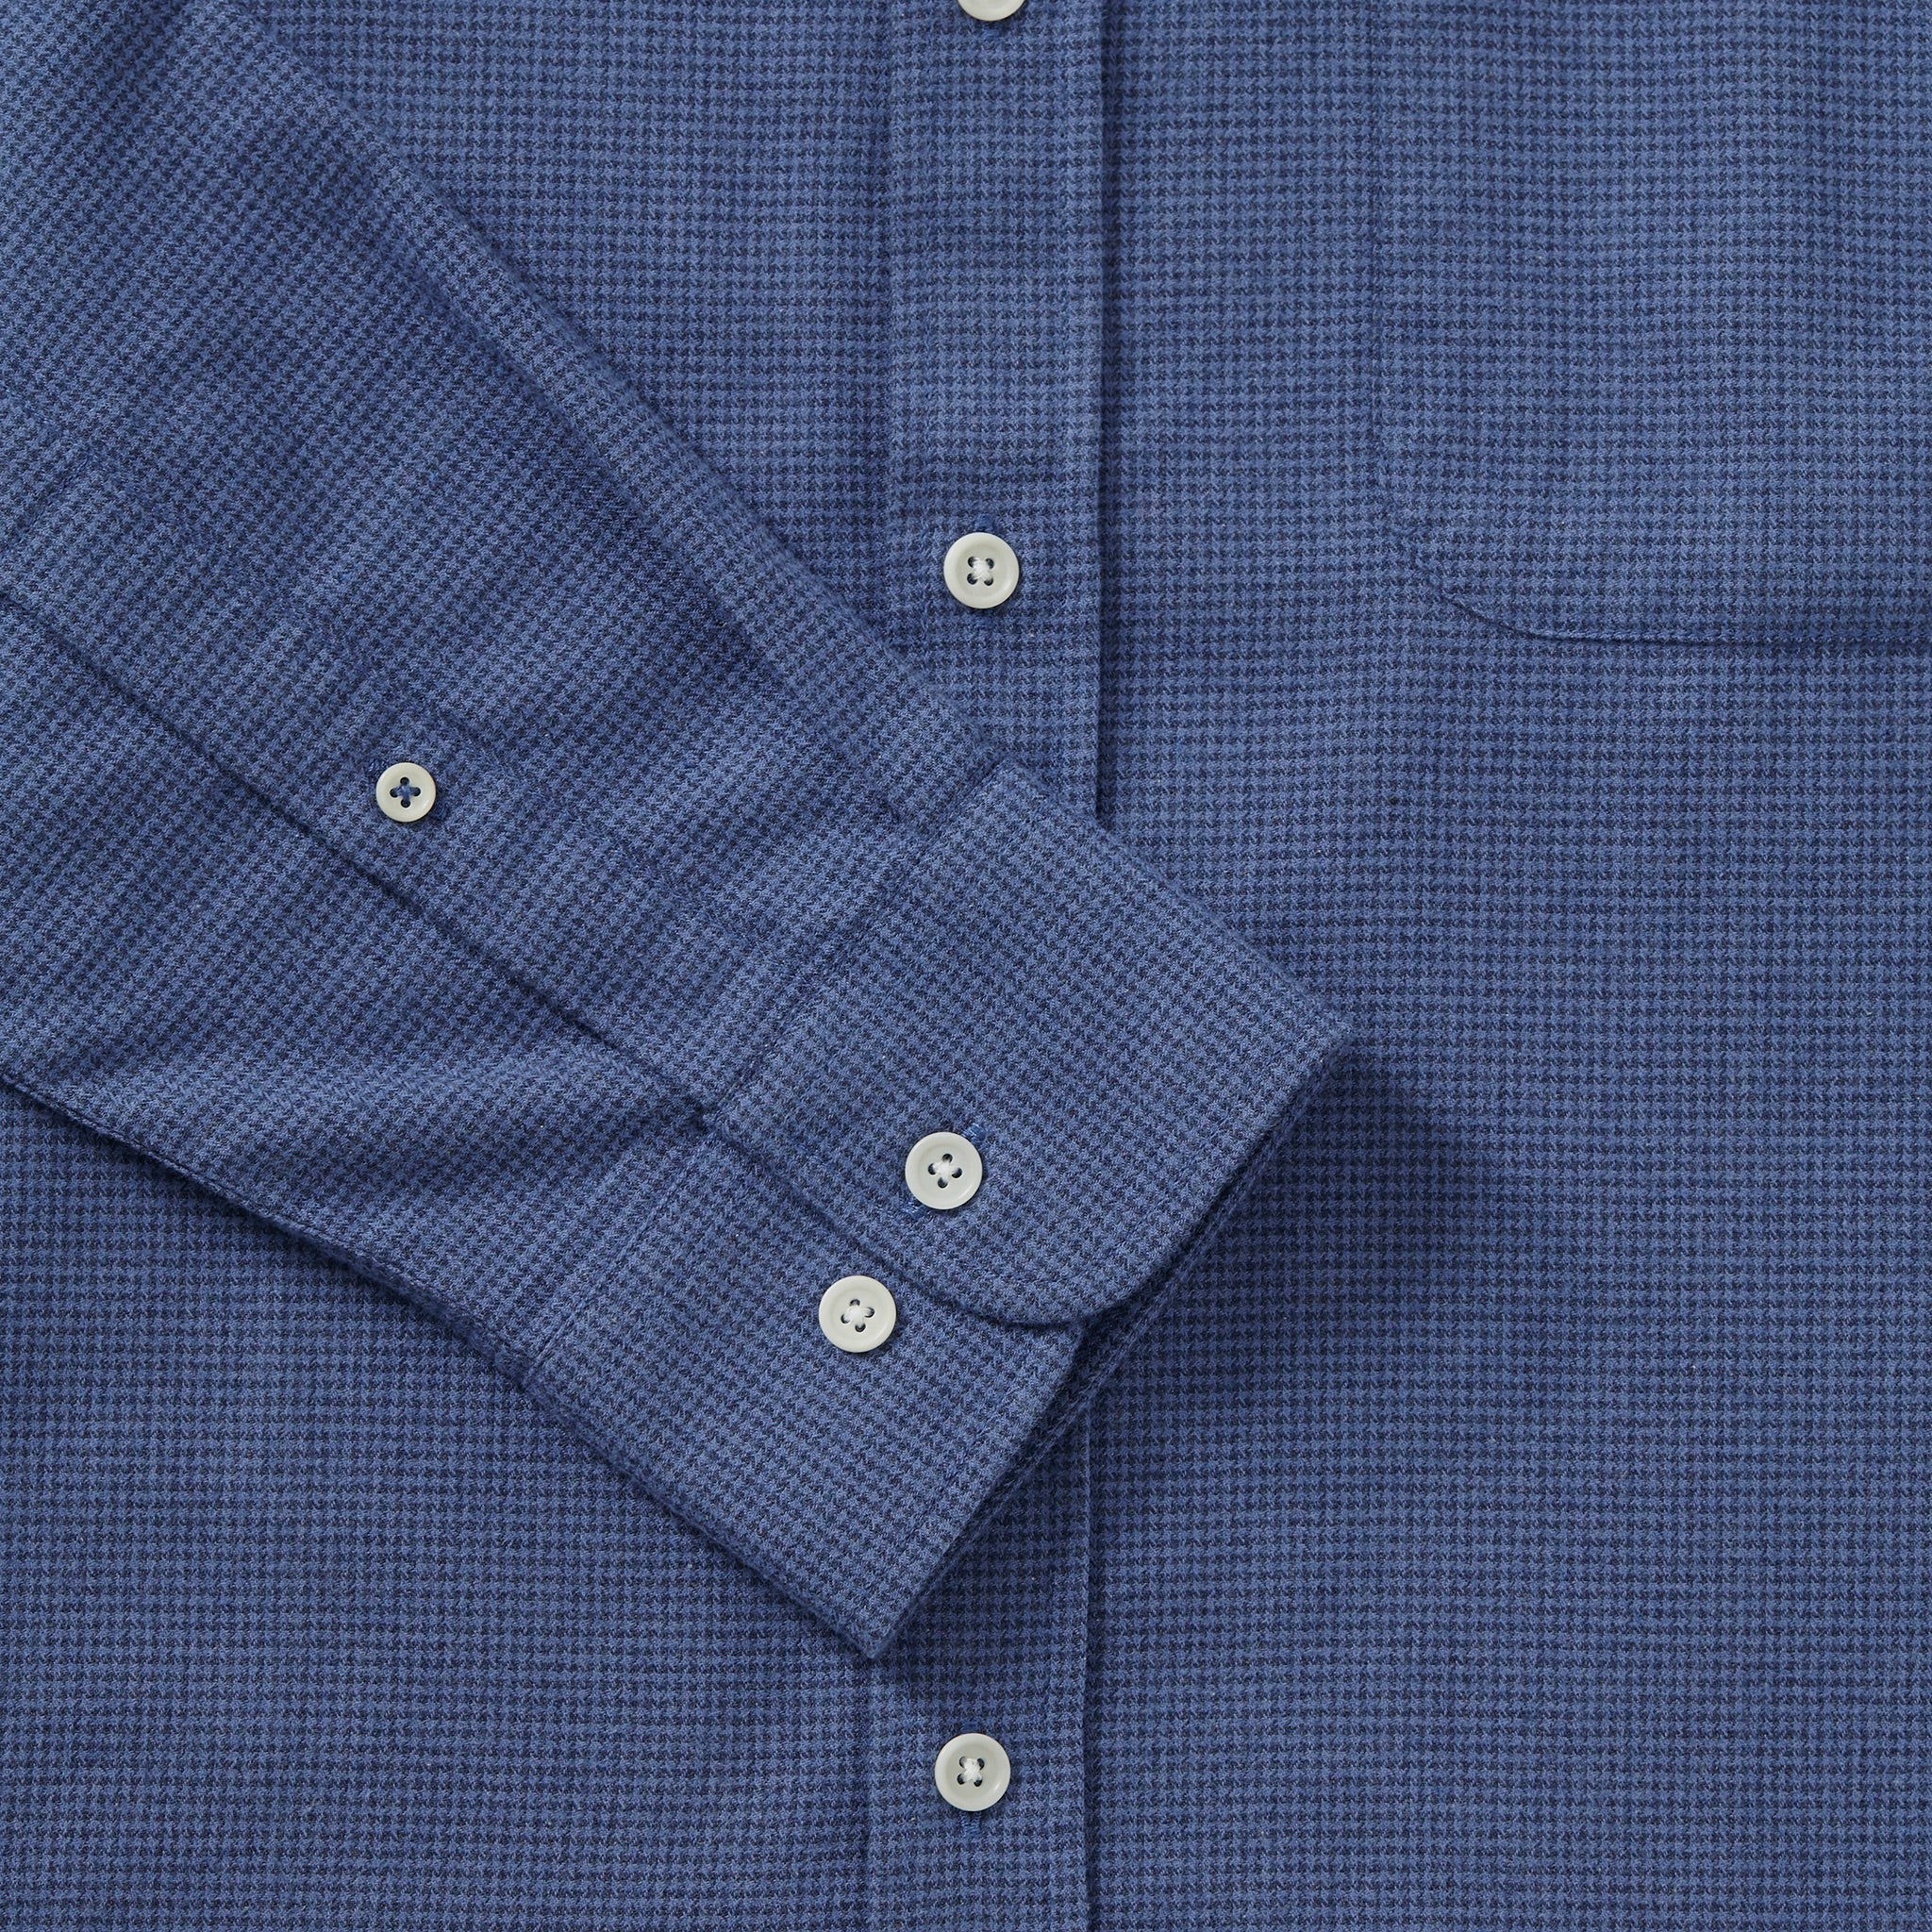 Brushed Cotton Collarless Shirt - Blue Houndstooth